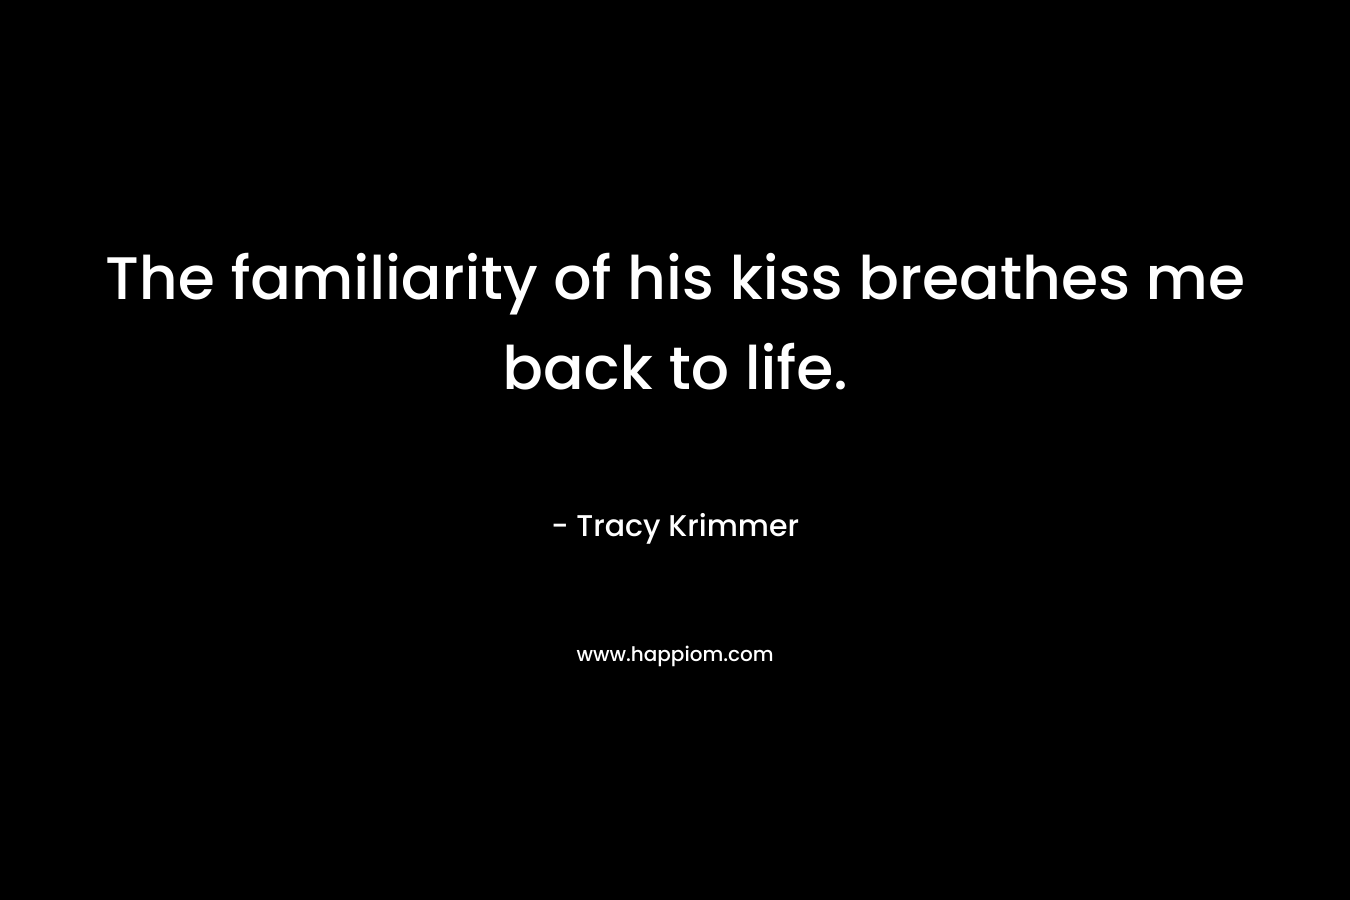 The familiarity of his kiss breathes me back to life. – Tracy Krimmer